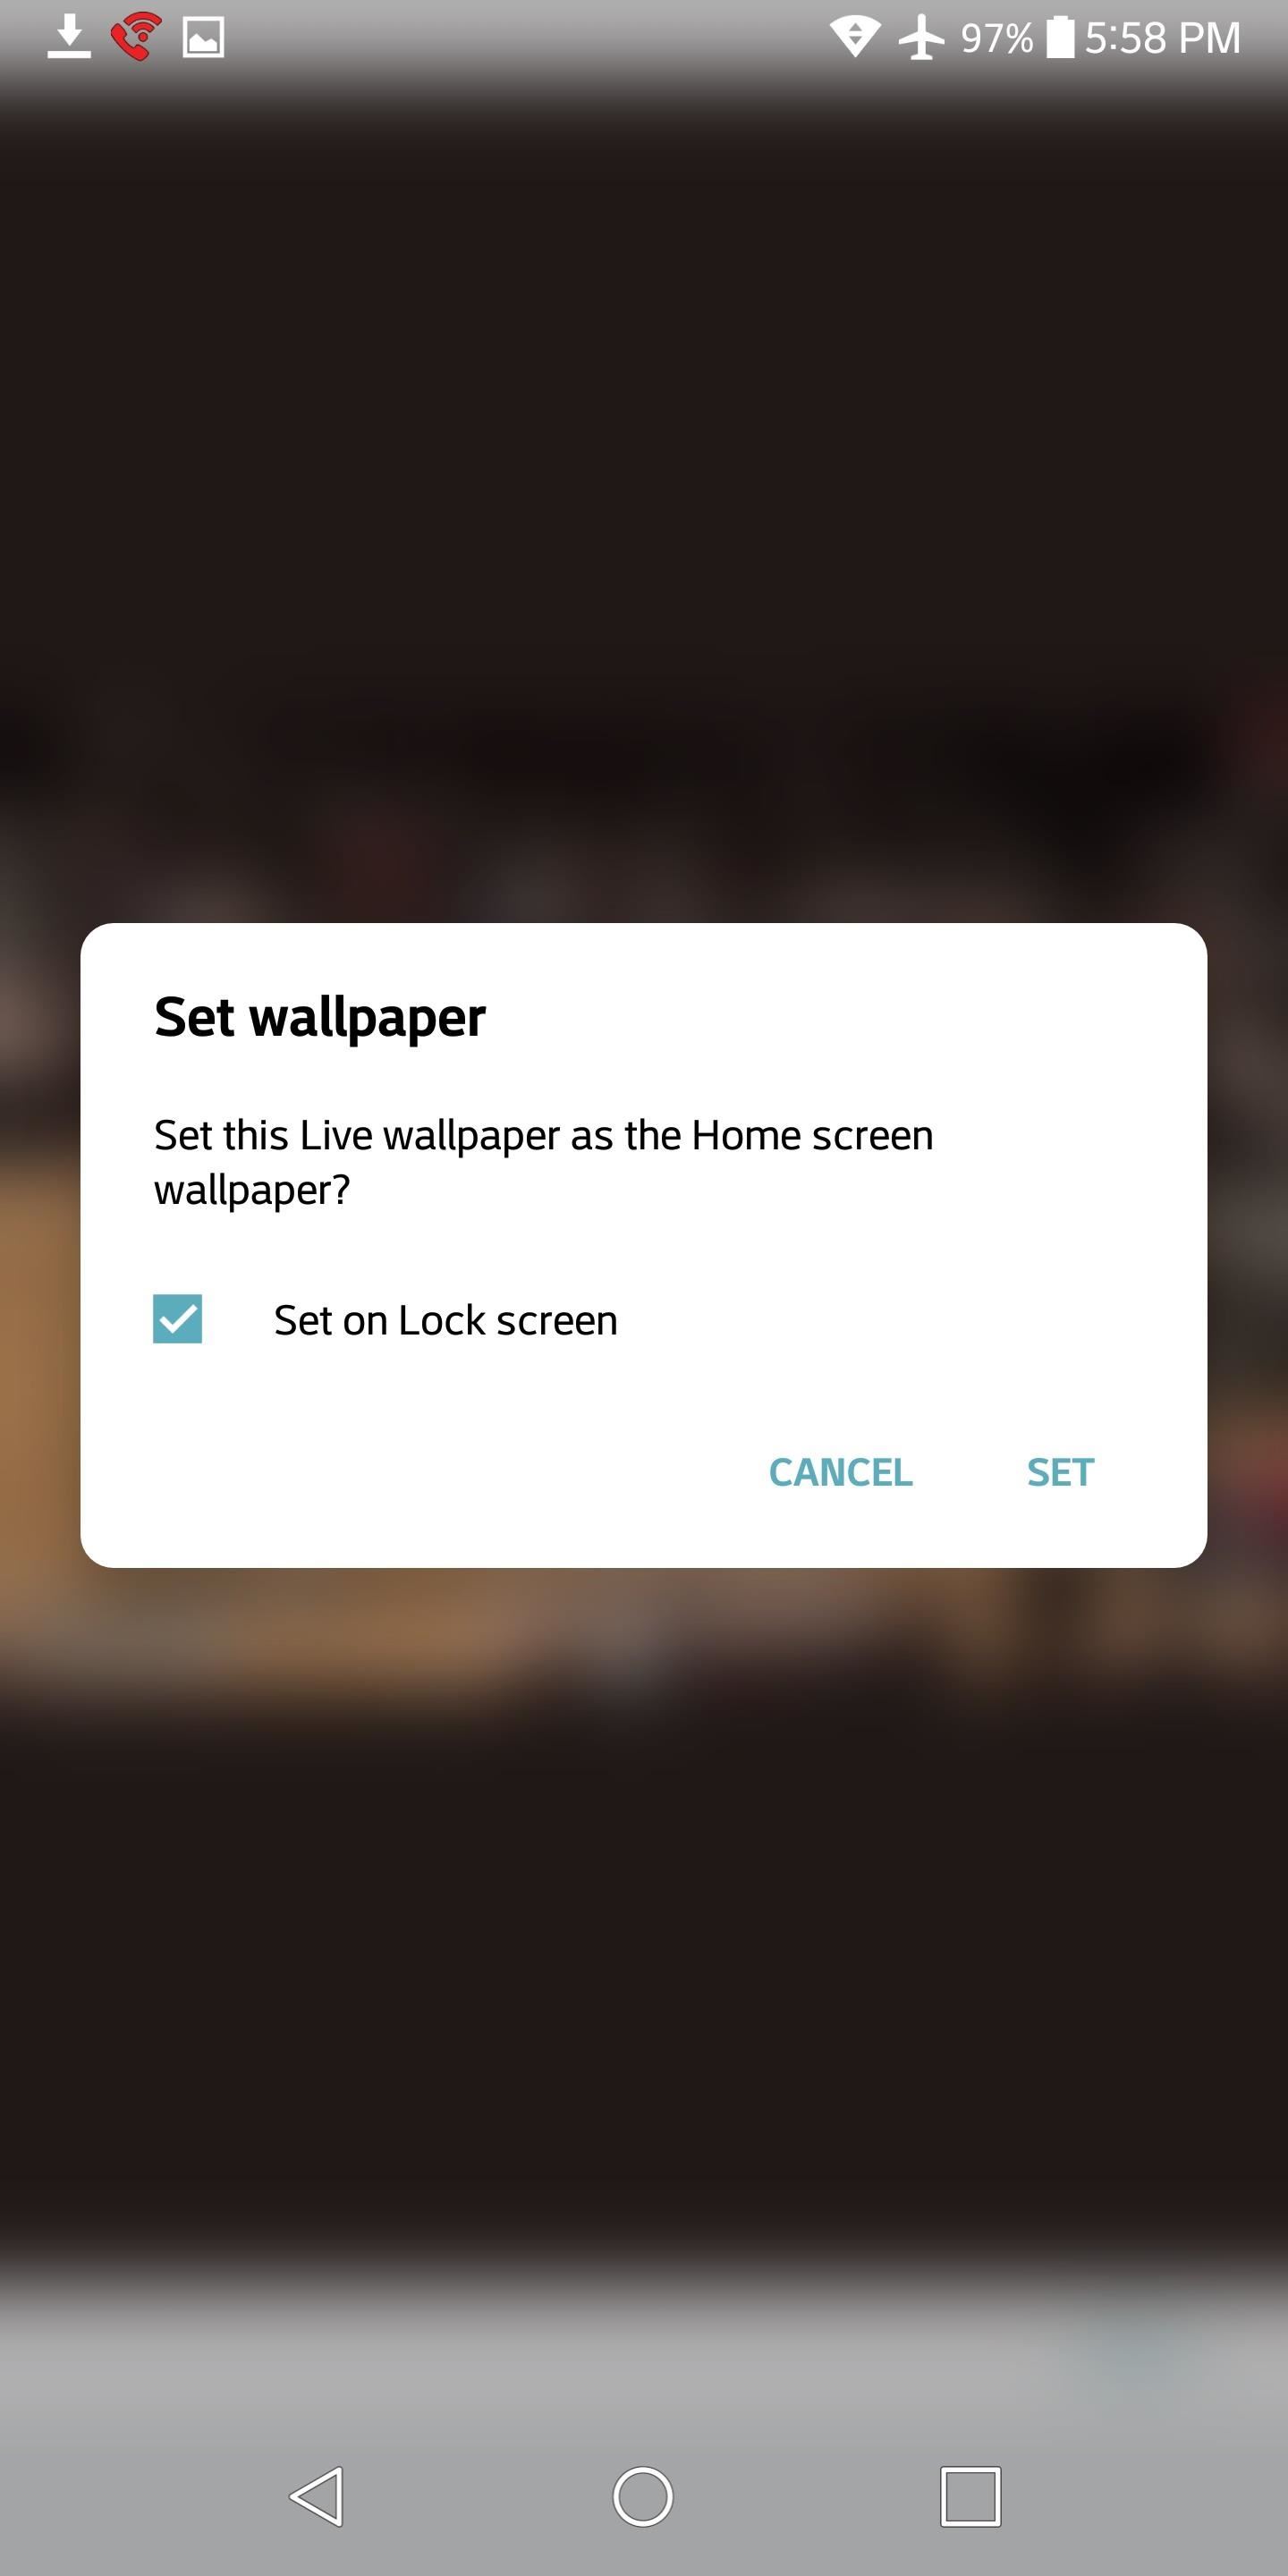 How to Set a GIF as the Wallpaper on Your Android's Home or Lock Screen